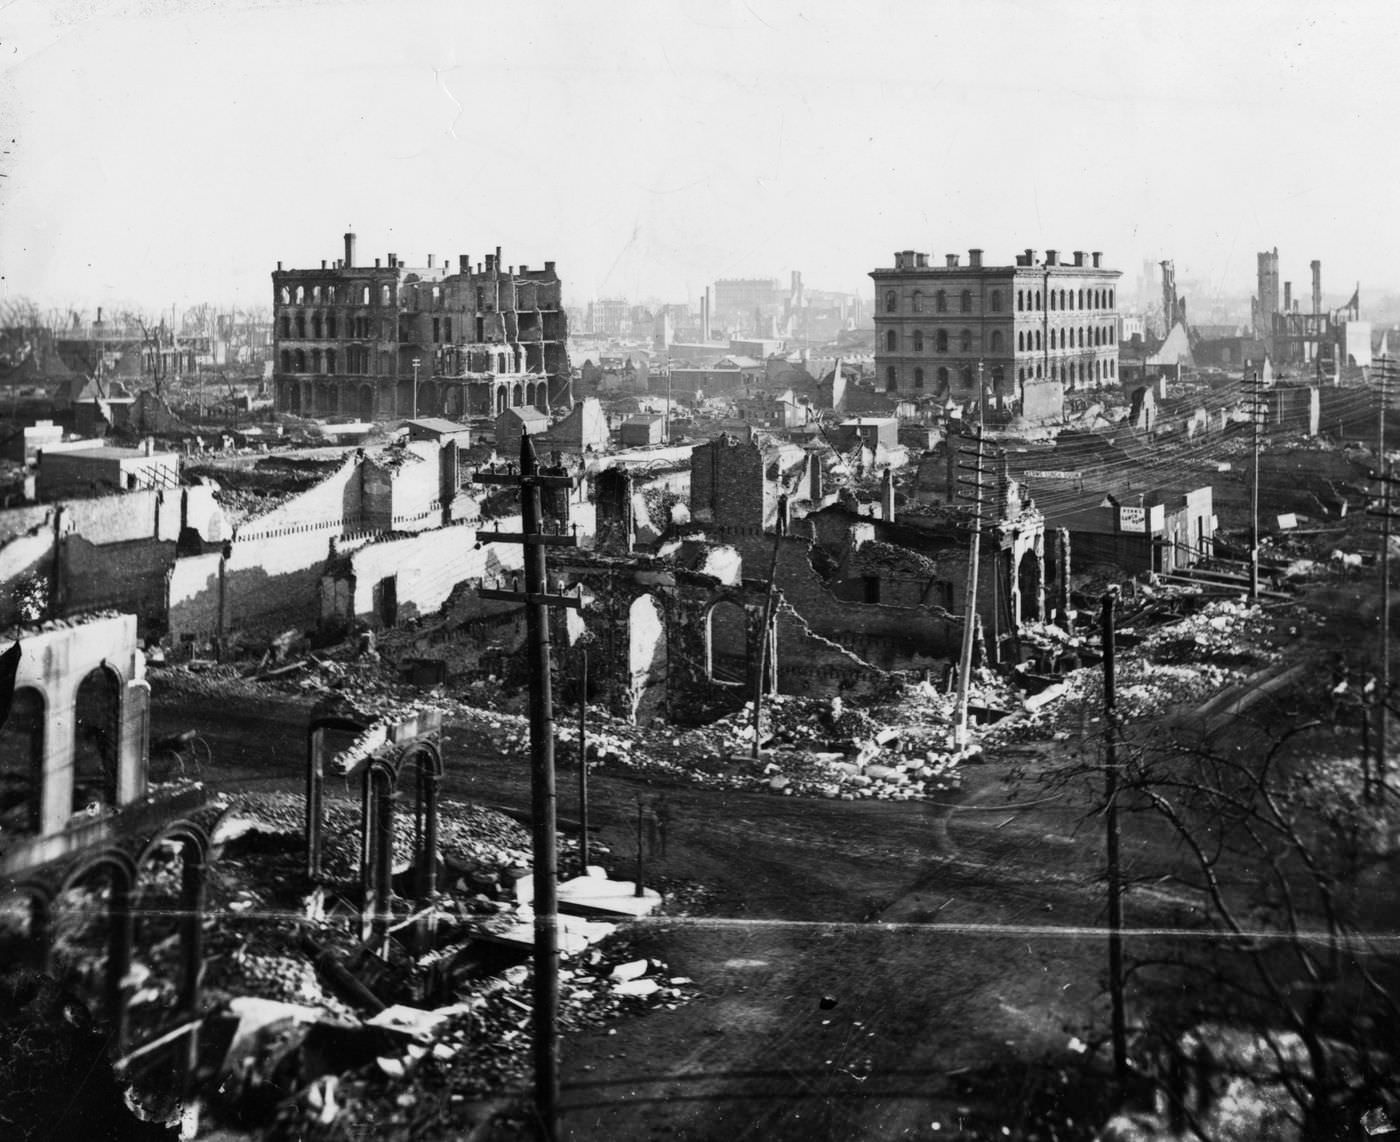 The view of the ruins of the Courthouse and City Hall after the Great Chicago Fire in 1871.